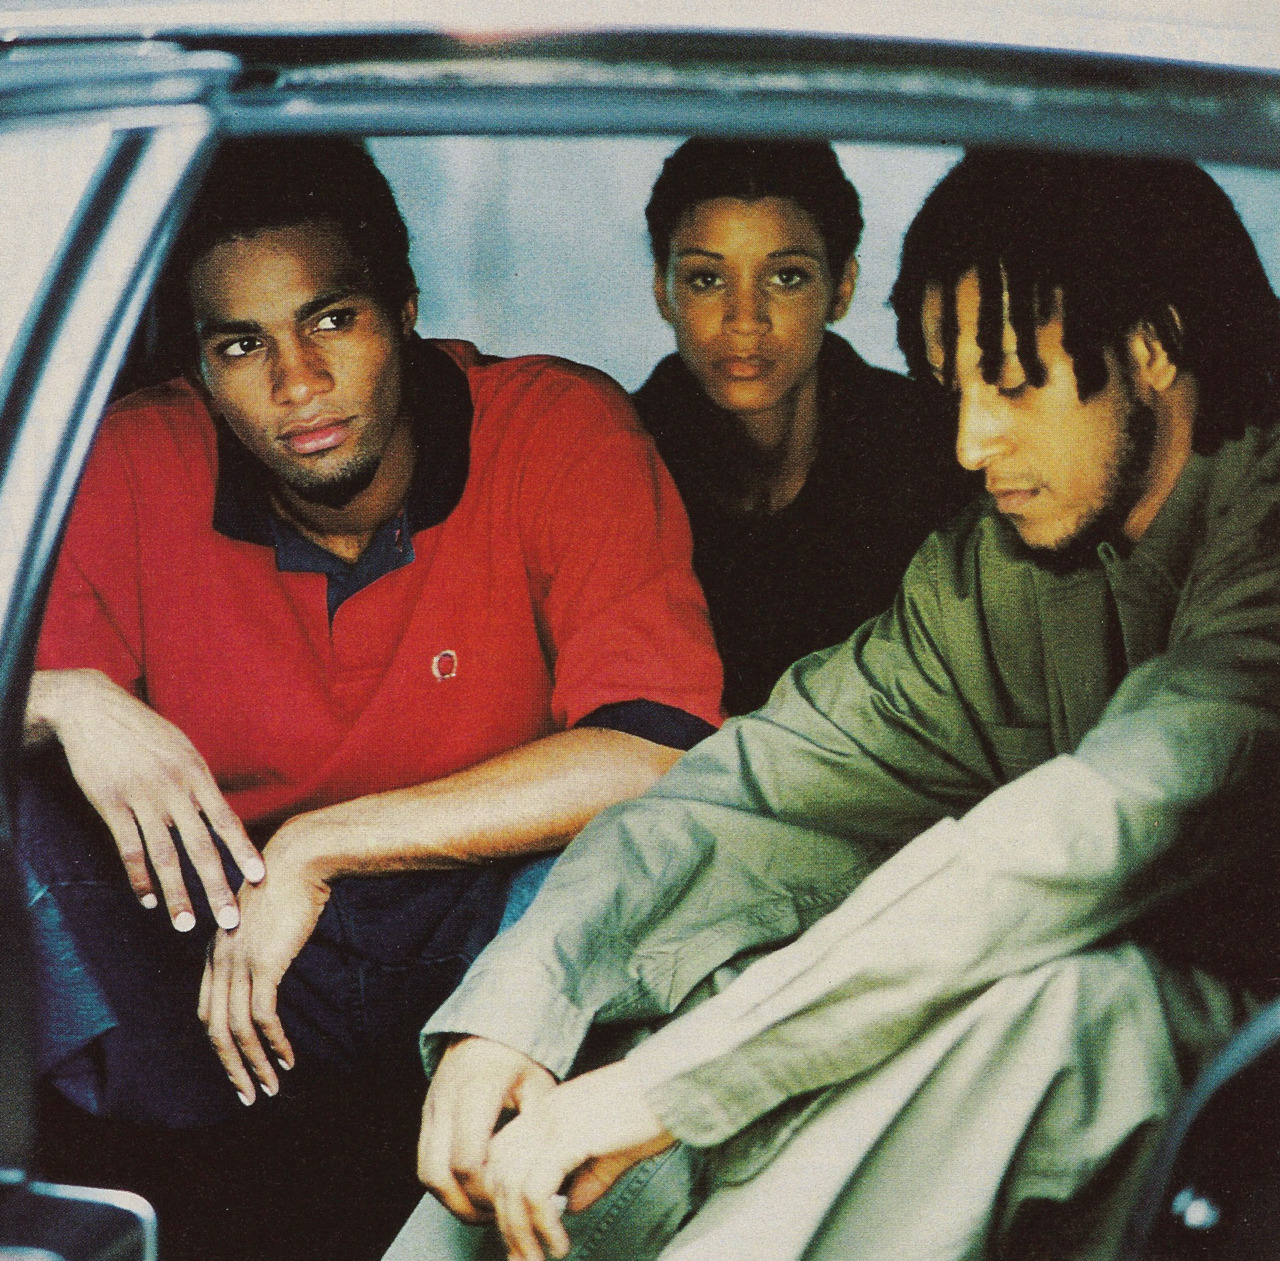 Digable Planets Article Written by dream hampton in November 1994